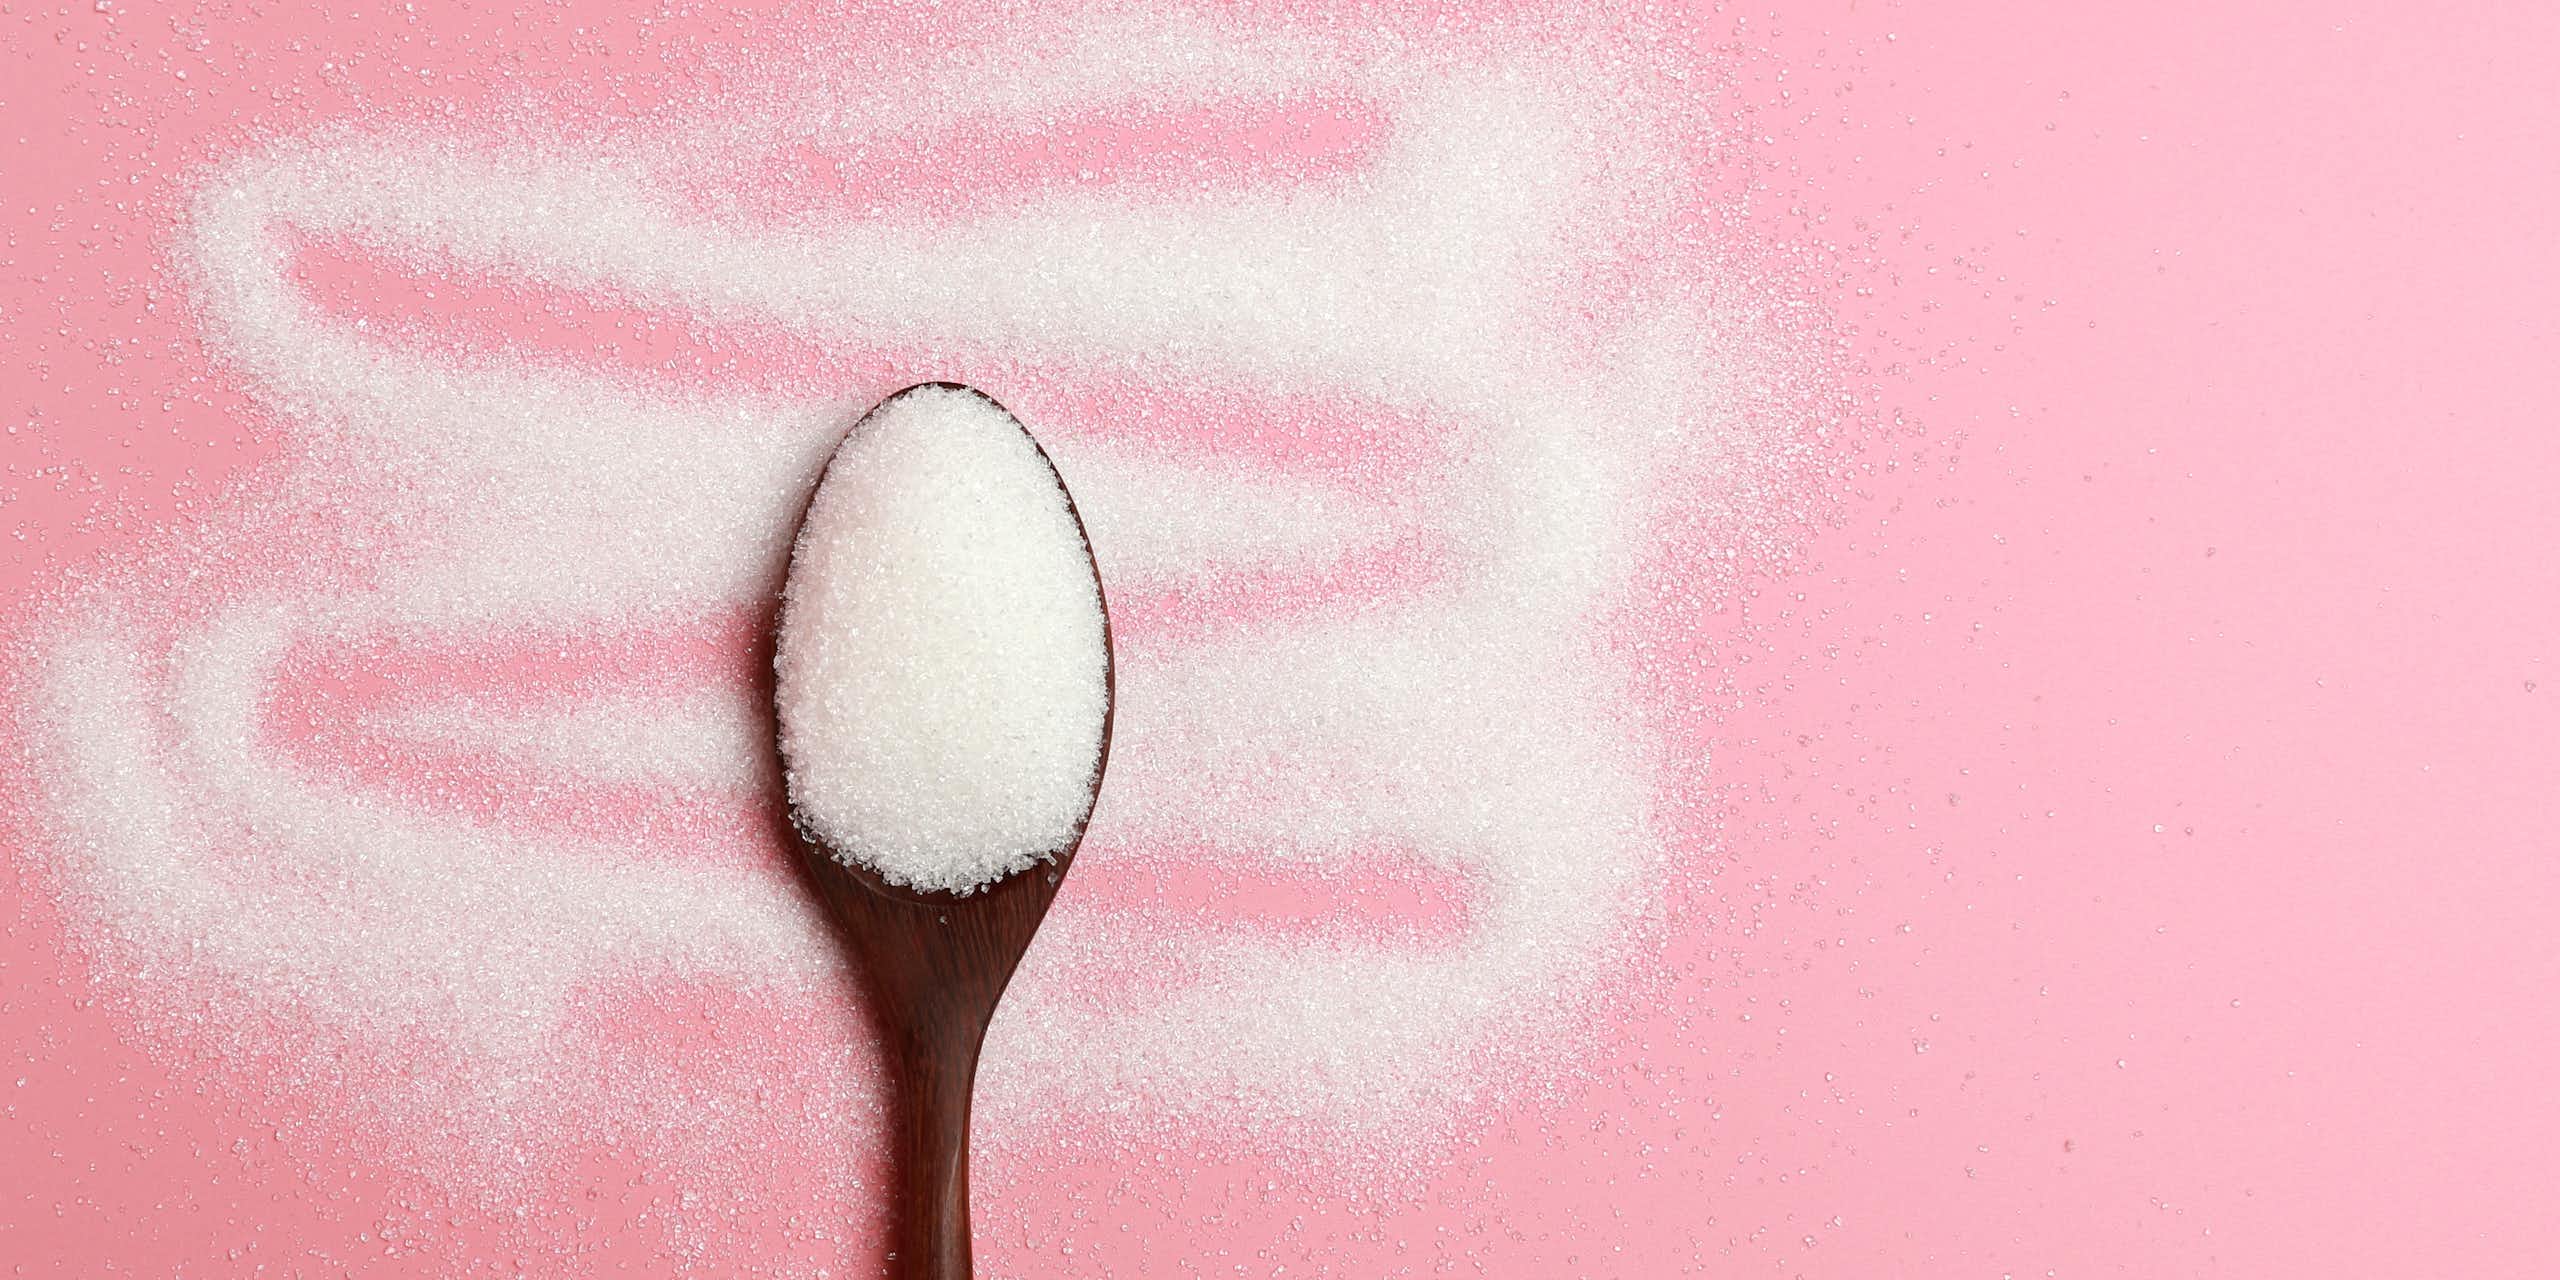 A spoonful of sugar on a pink background.